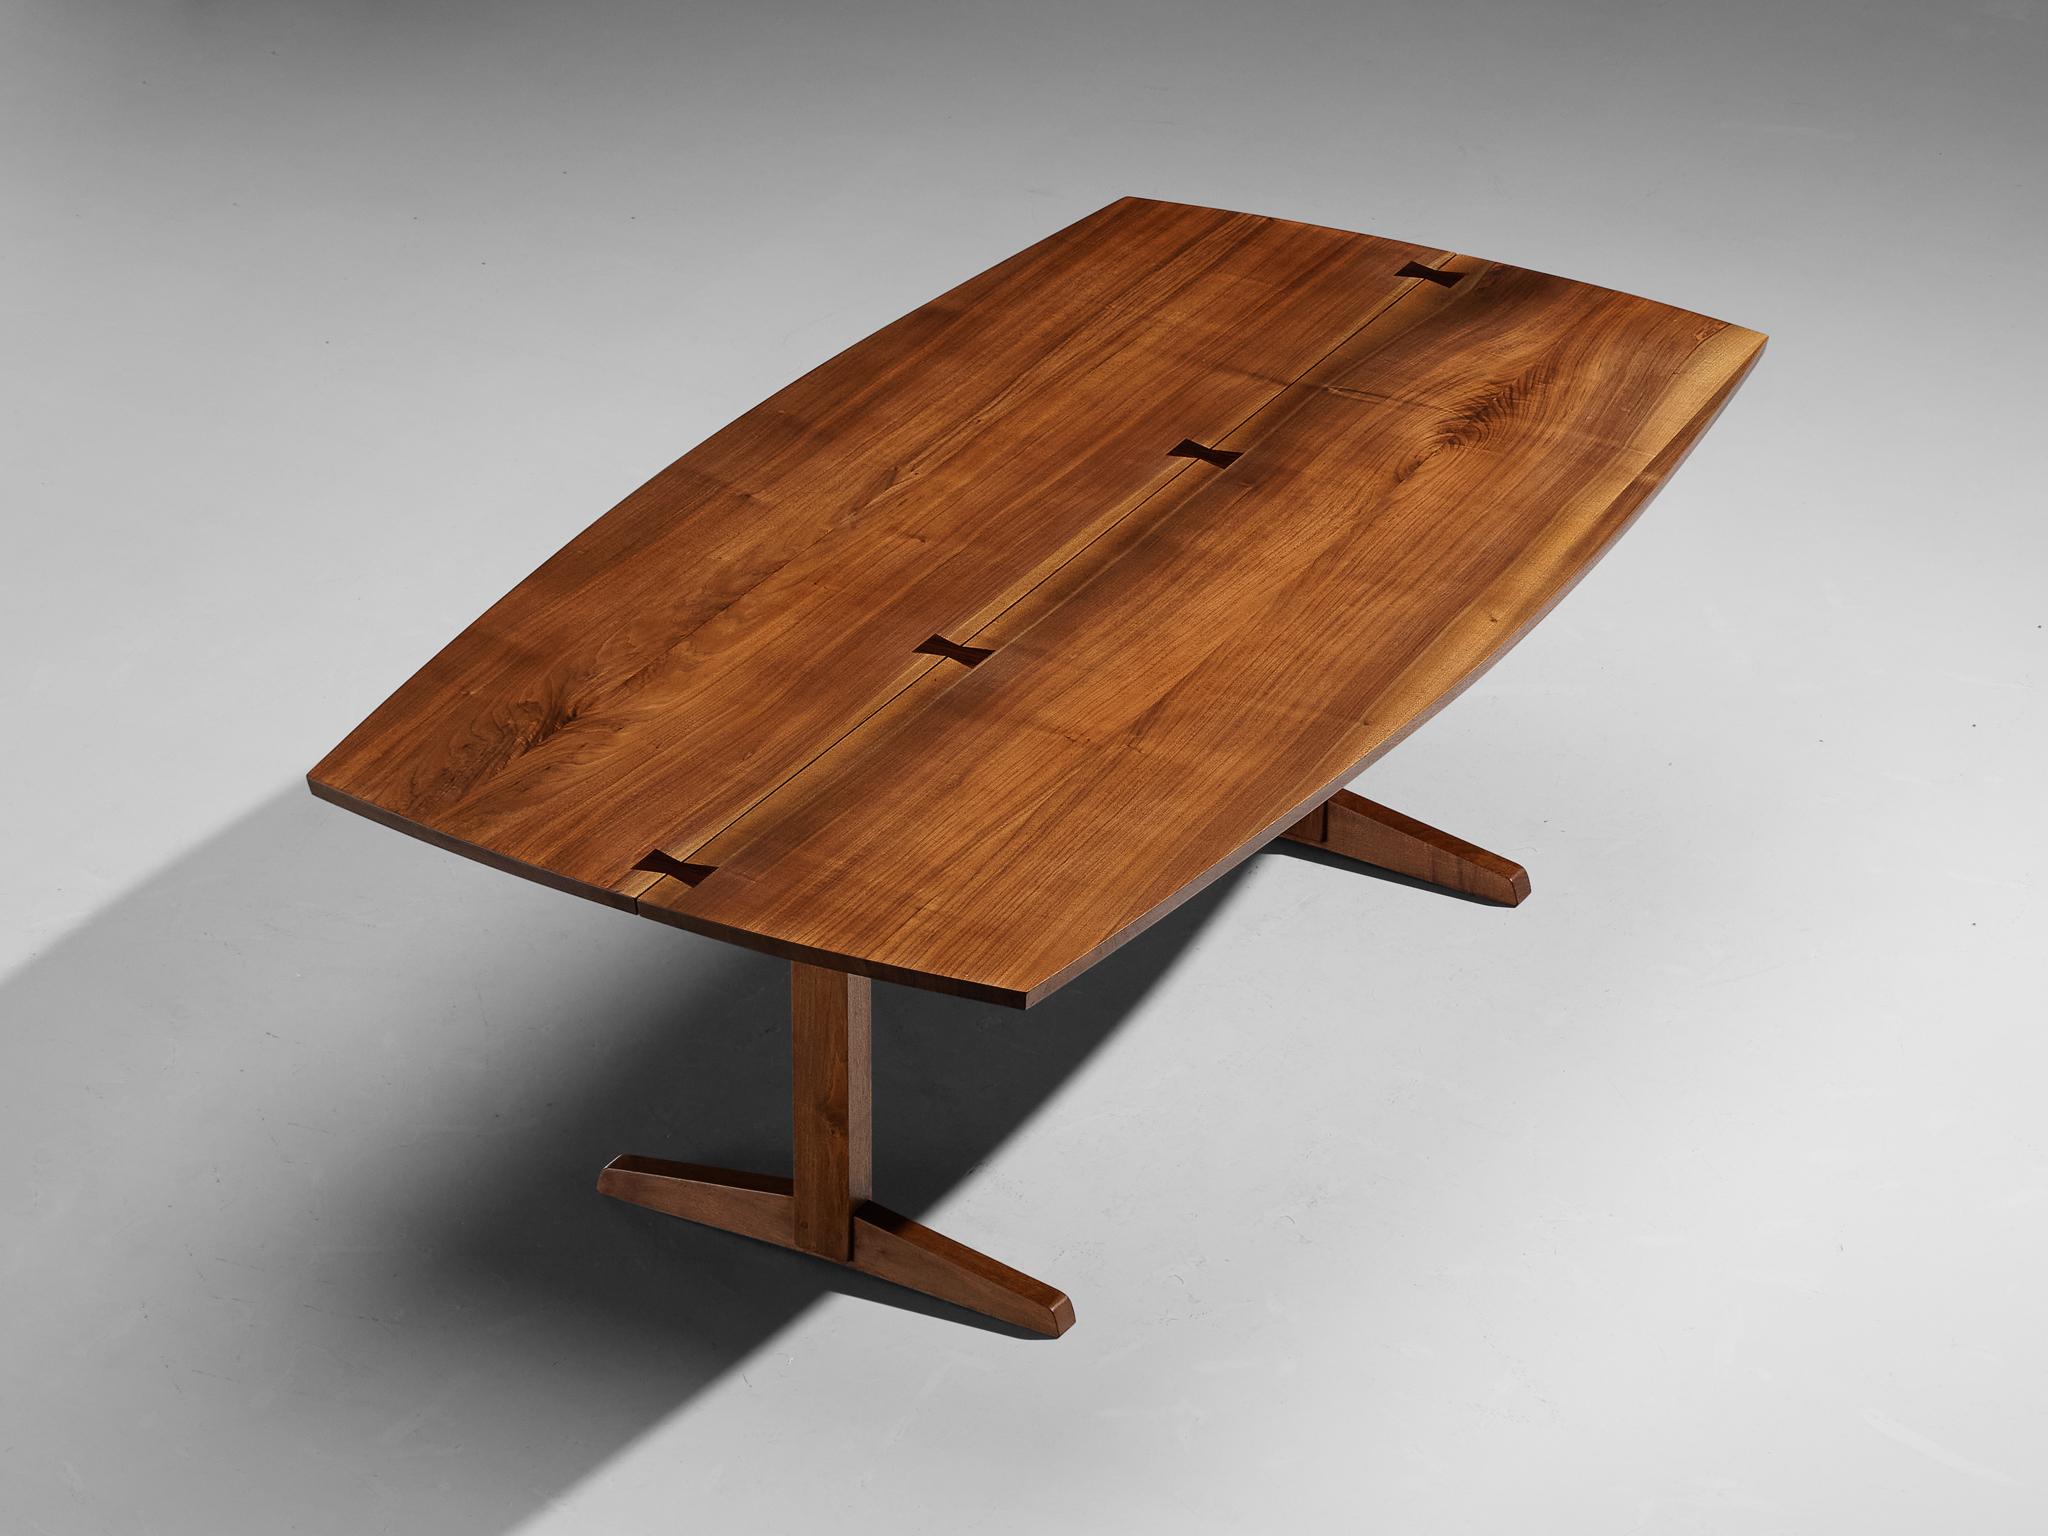 George Nakashima, boat-shaped trestle dining table, walnut, United States, 1959

This exquisite and exceptionally large dining table was designed by George Nakashima and created in his studio in New Hope, Pennsylvania. American woodworker and